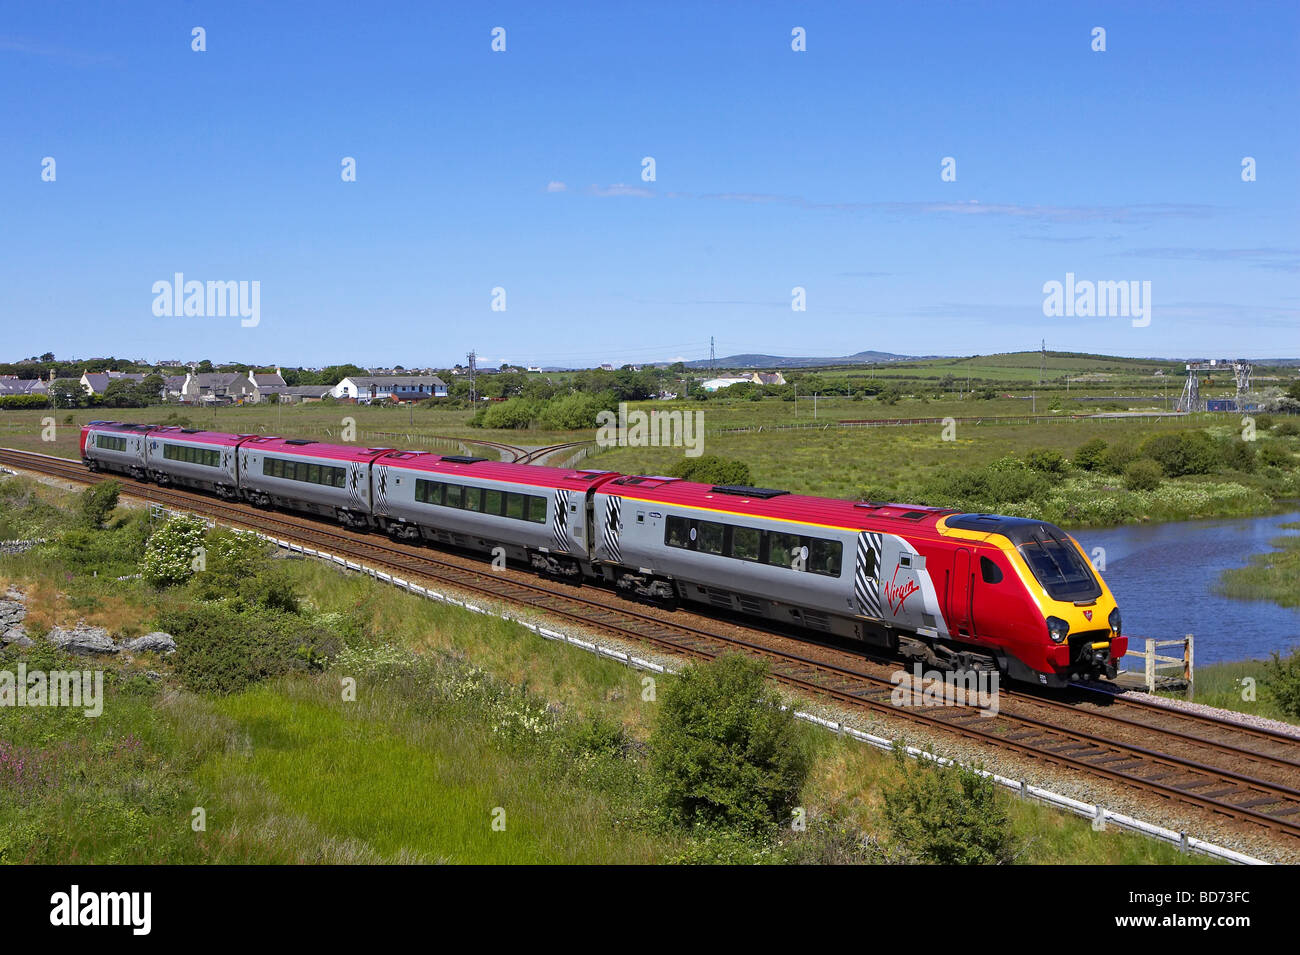 Virgin Super Voyager 221 108 passes Valley on Anglesey with a Holyhead Euston service on 27 06 09 Stock Photo